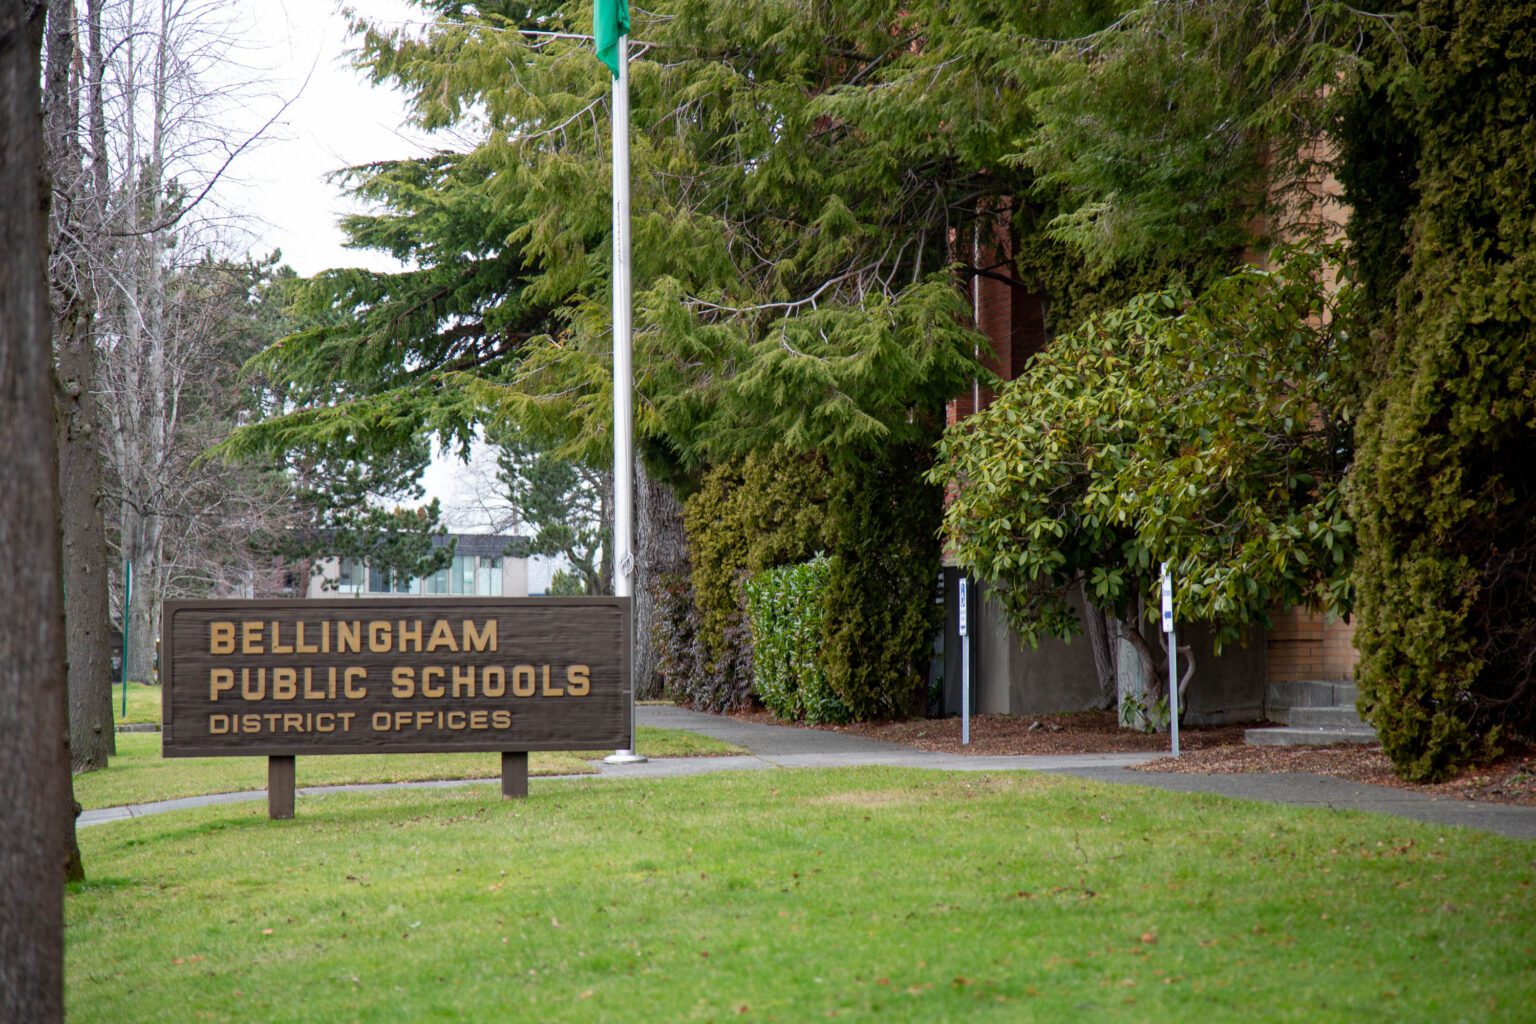 Bellingham Public Schools on Jan. 12 denied allegations of mishandling the sexual assaults of a student in a response to a federal lawsuit.